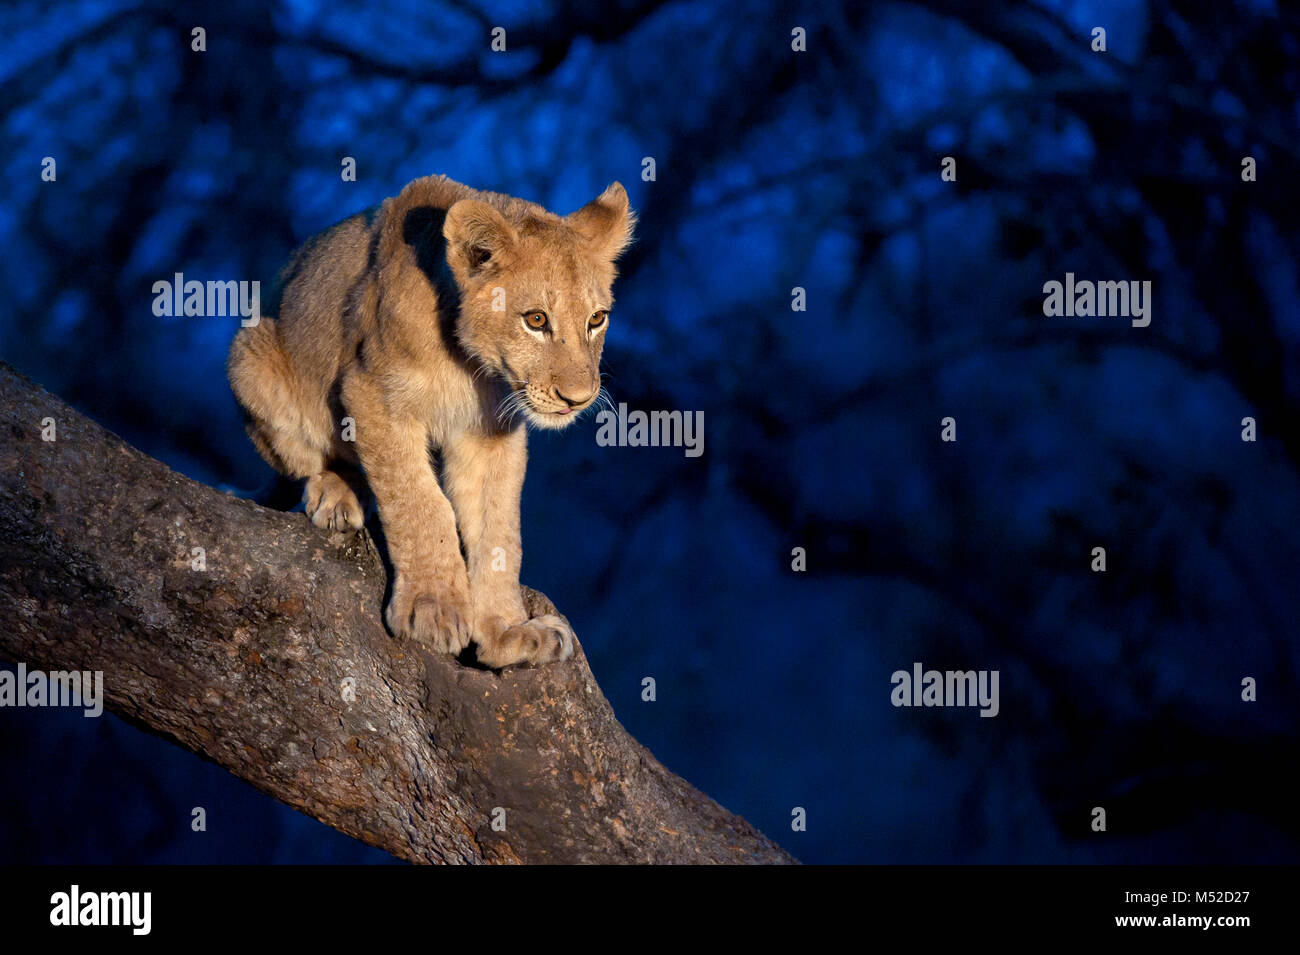 Lion cub in tree at dusk. Stock Photo